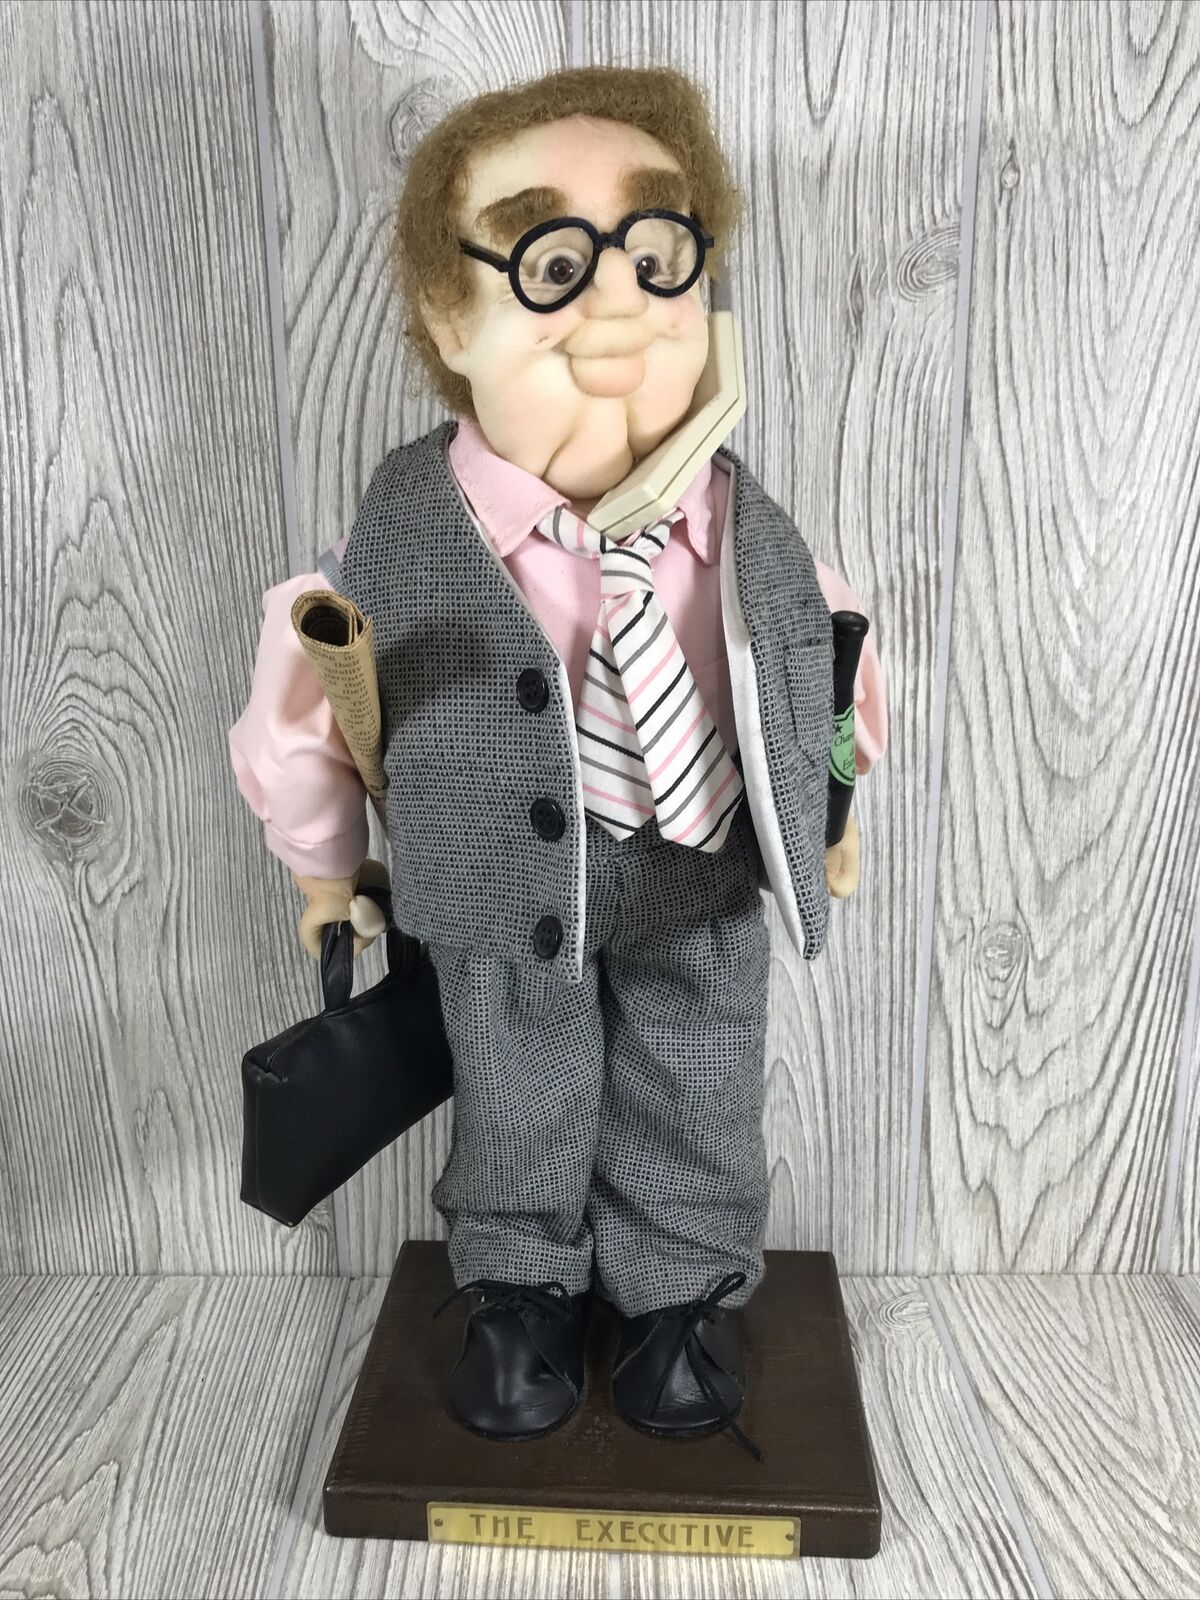 “The Executive” From Cadena Studios & Applause-Slice Of Life Series 1986 Doll